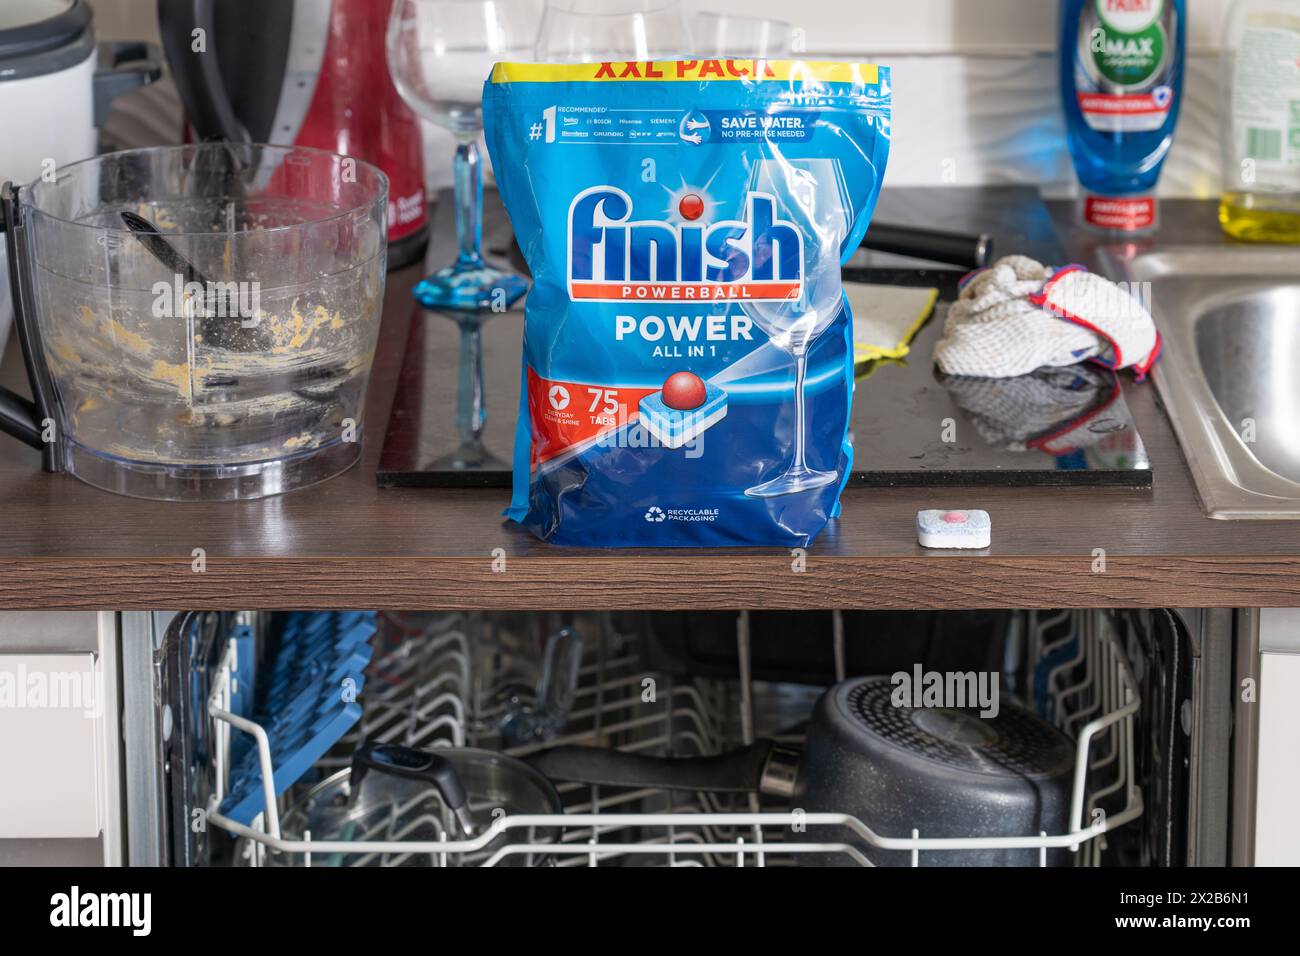 Finish Powerball Power All in 1 pack of dishwasher tablets on a kitchen surface with dirty washing up around and a dishwasher below. England Stock Photo